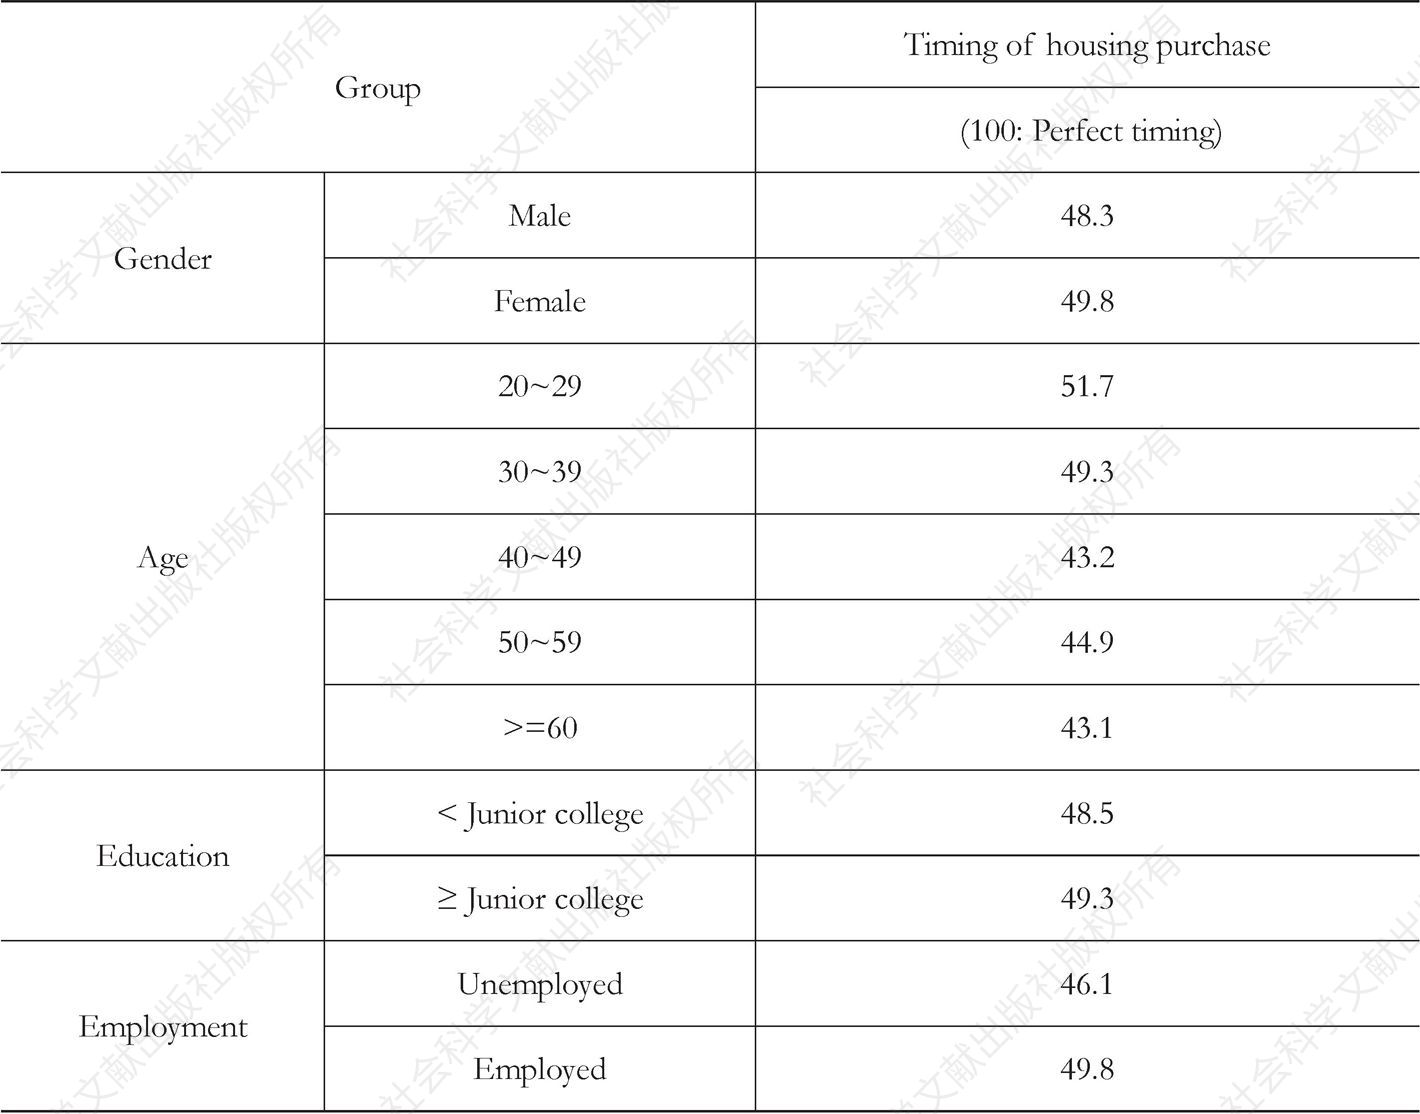 Table 7 Choices of housing purchase timing by gender，age，education and employment